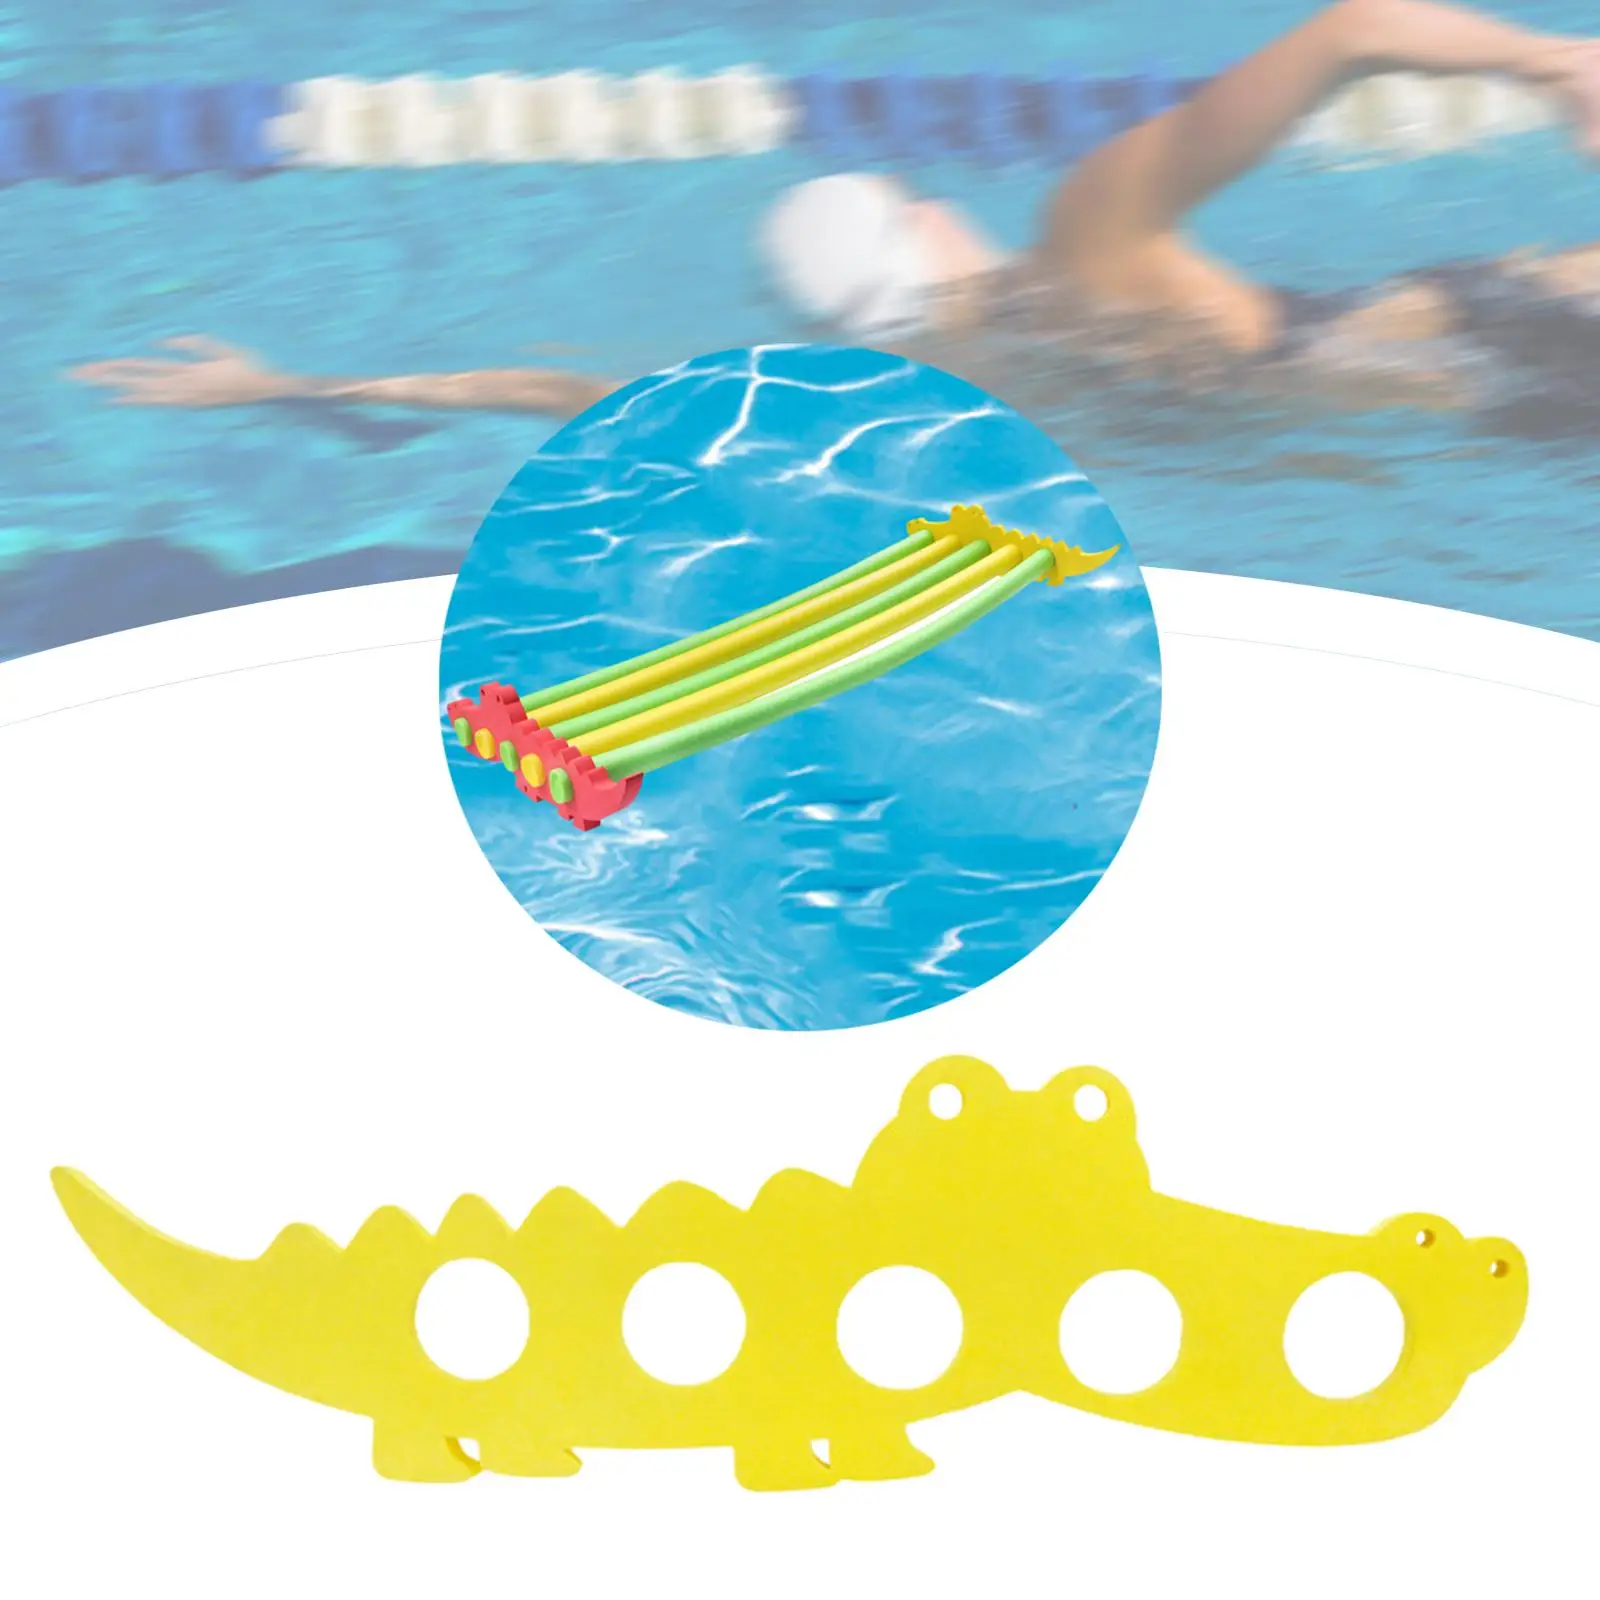 Swim Connector Holed Pool Floats Water Connector for Lake Teens Water Sports